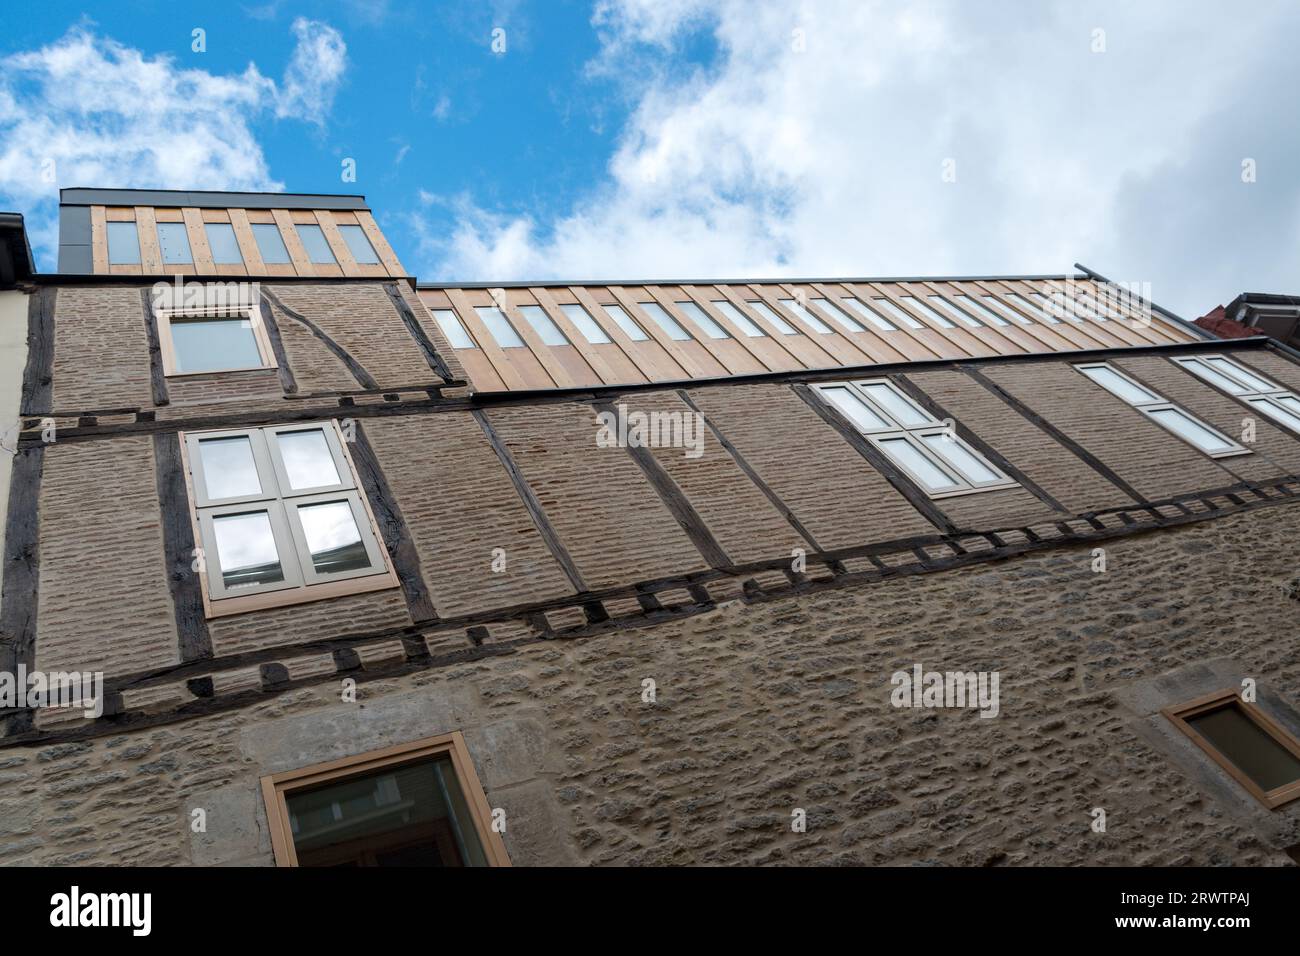 Medieval centre of Vitoria, Basque Country, spain Stock Photo